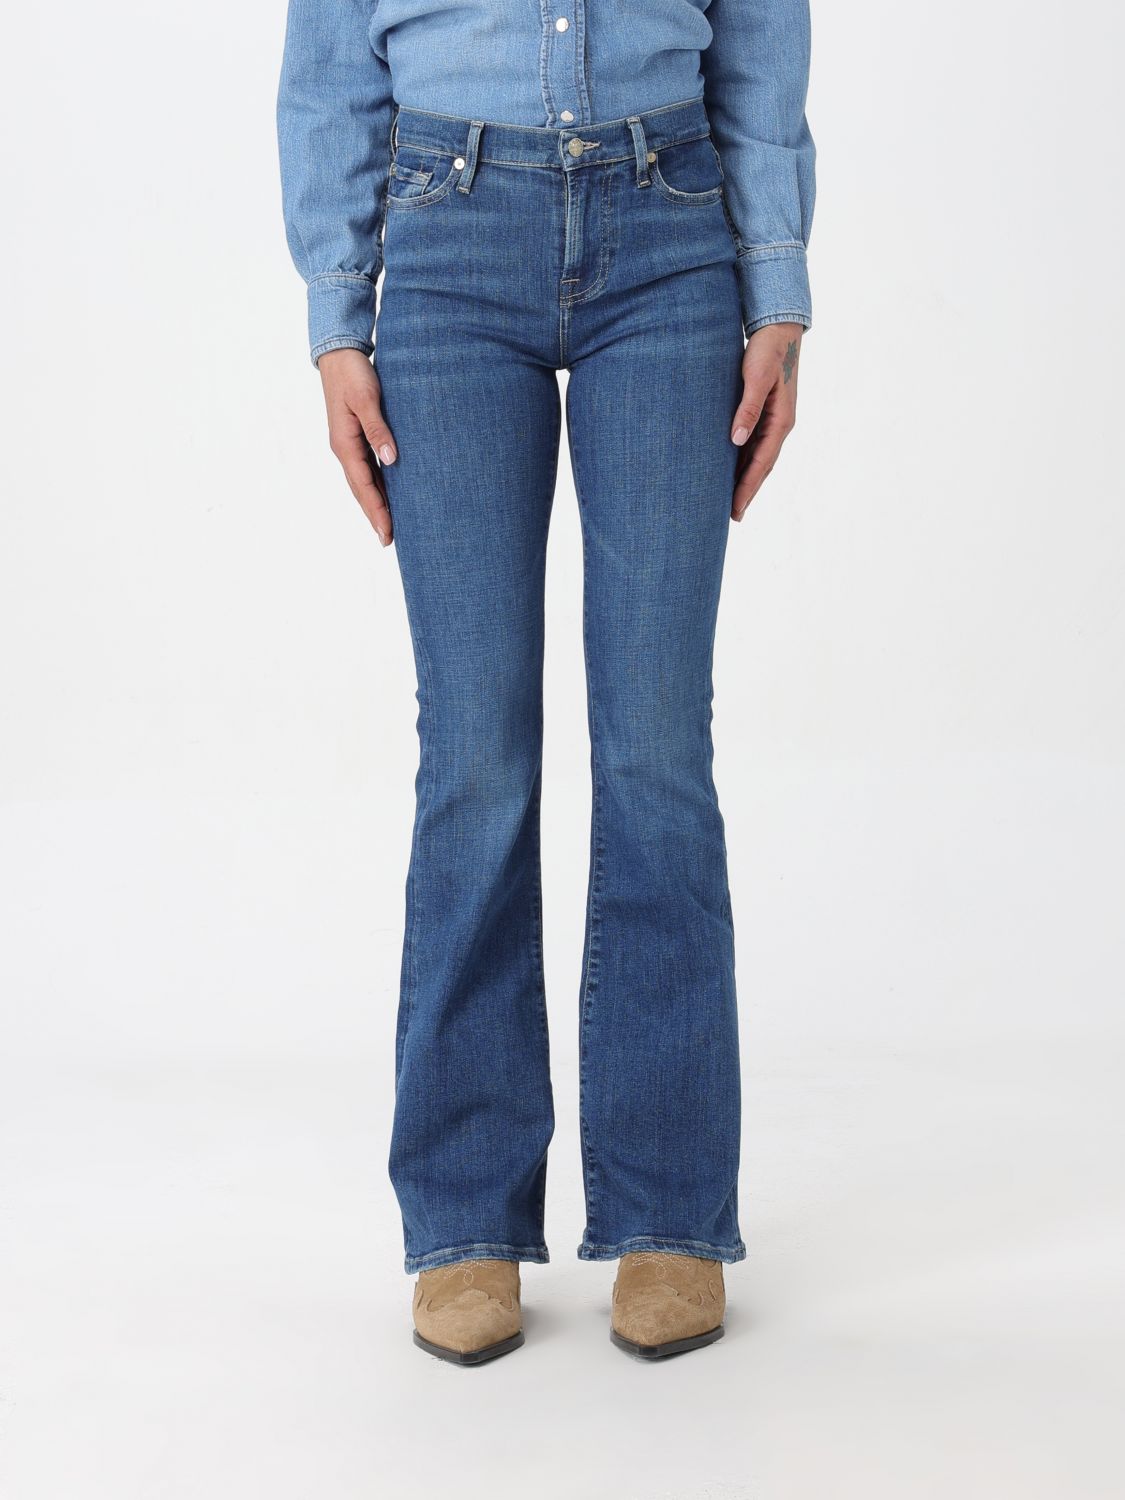 jeans 7 for all mankind woman colour blue